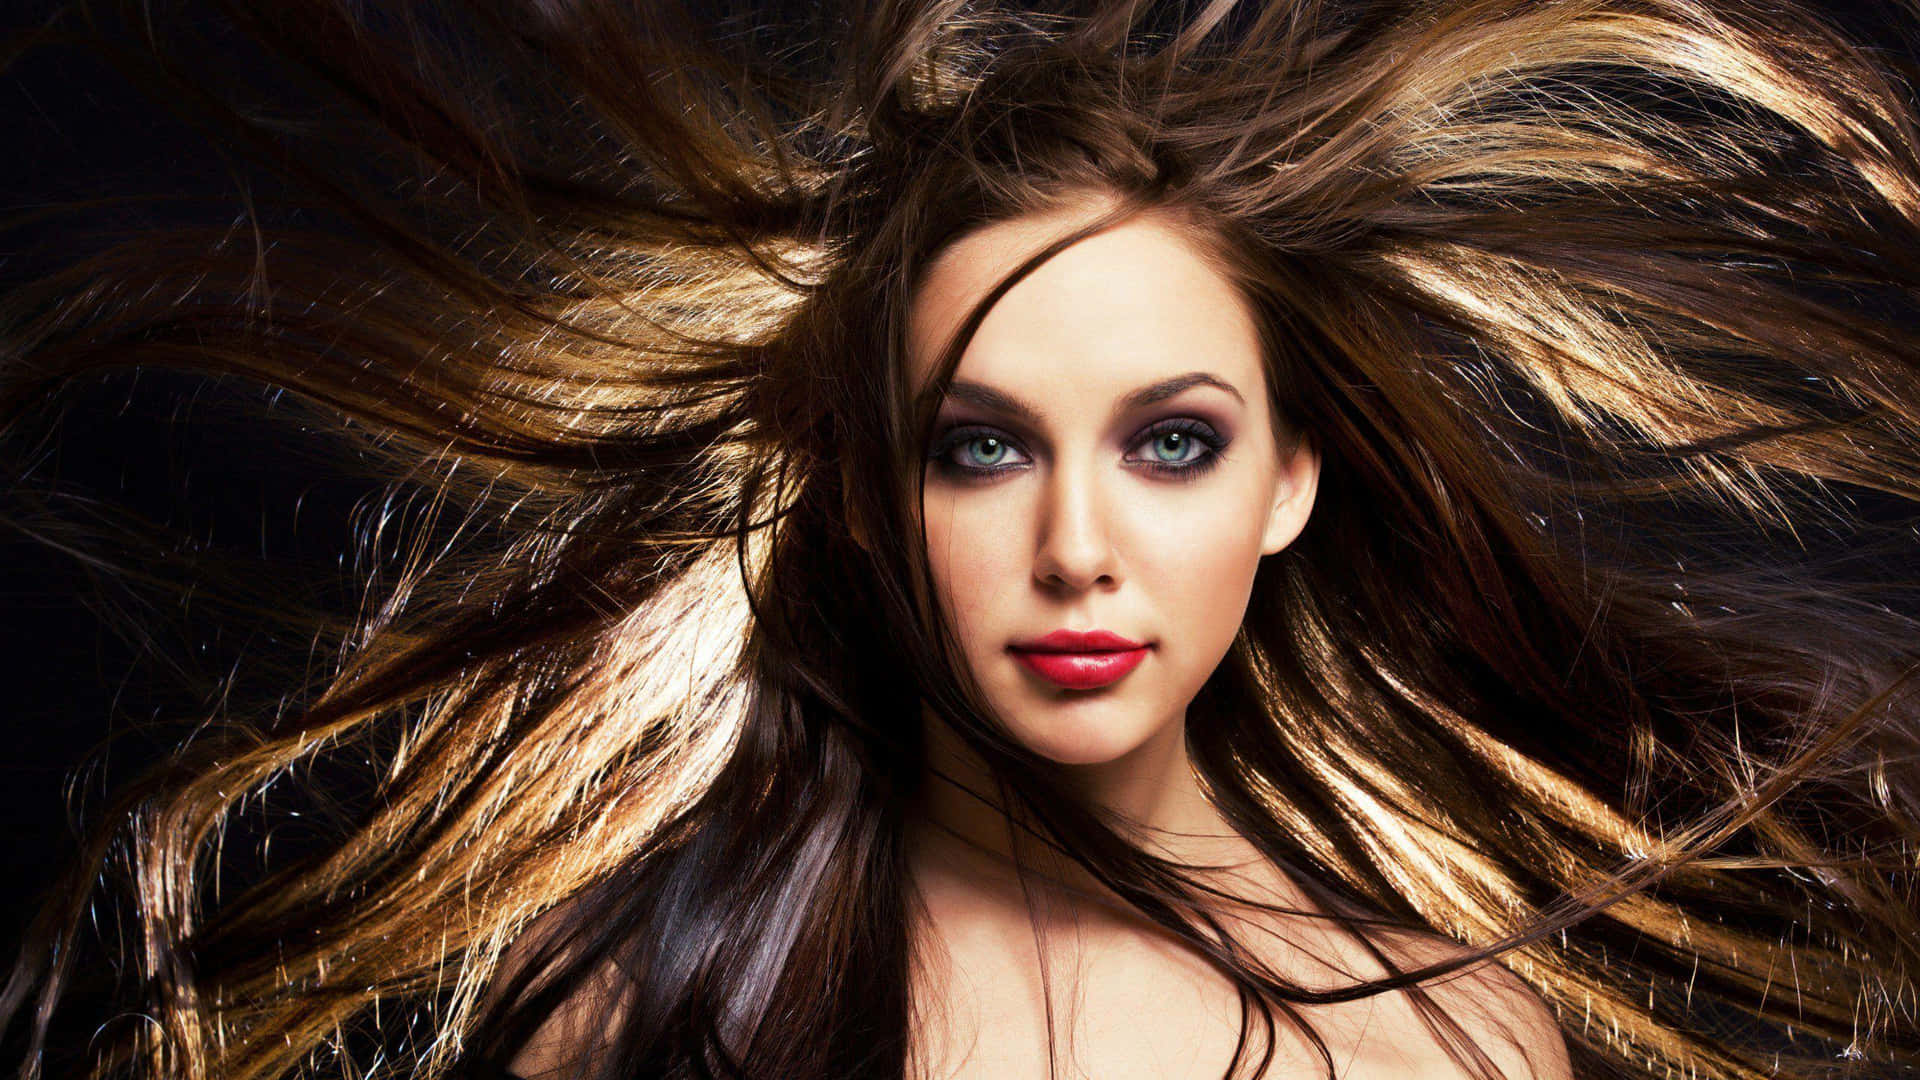 Download Hair Style Pictures 2560 x 1440 